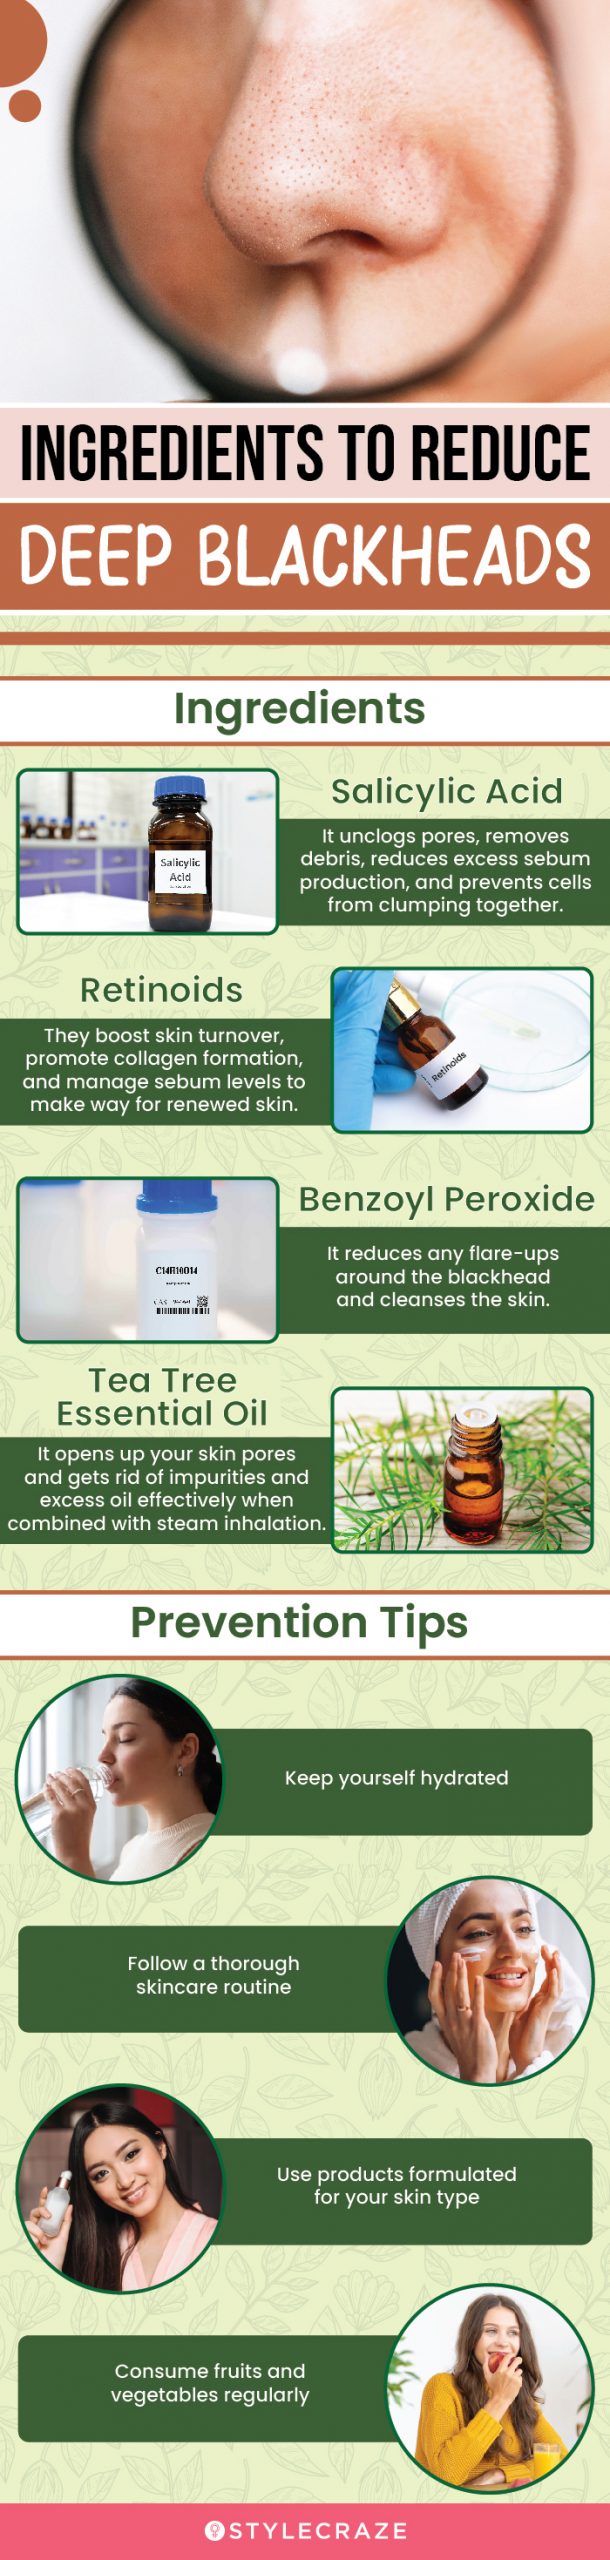 ingredients to reduce deep blackheads (infographic)